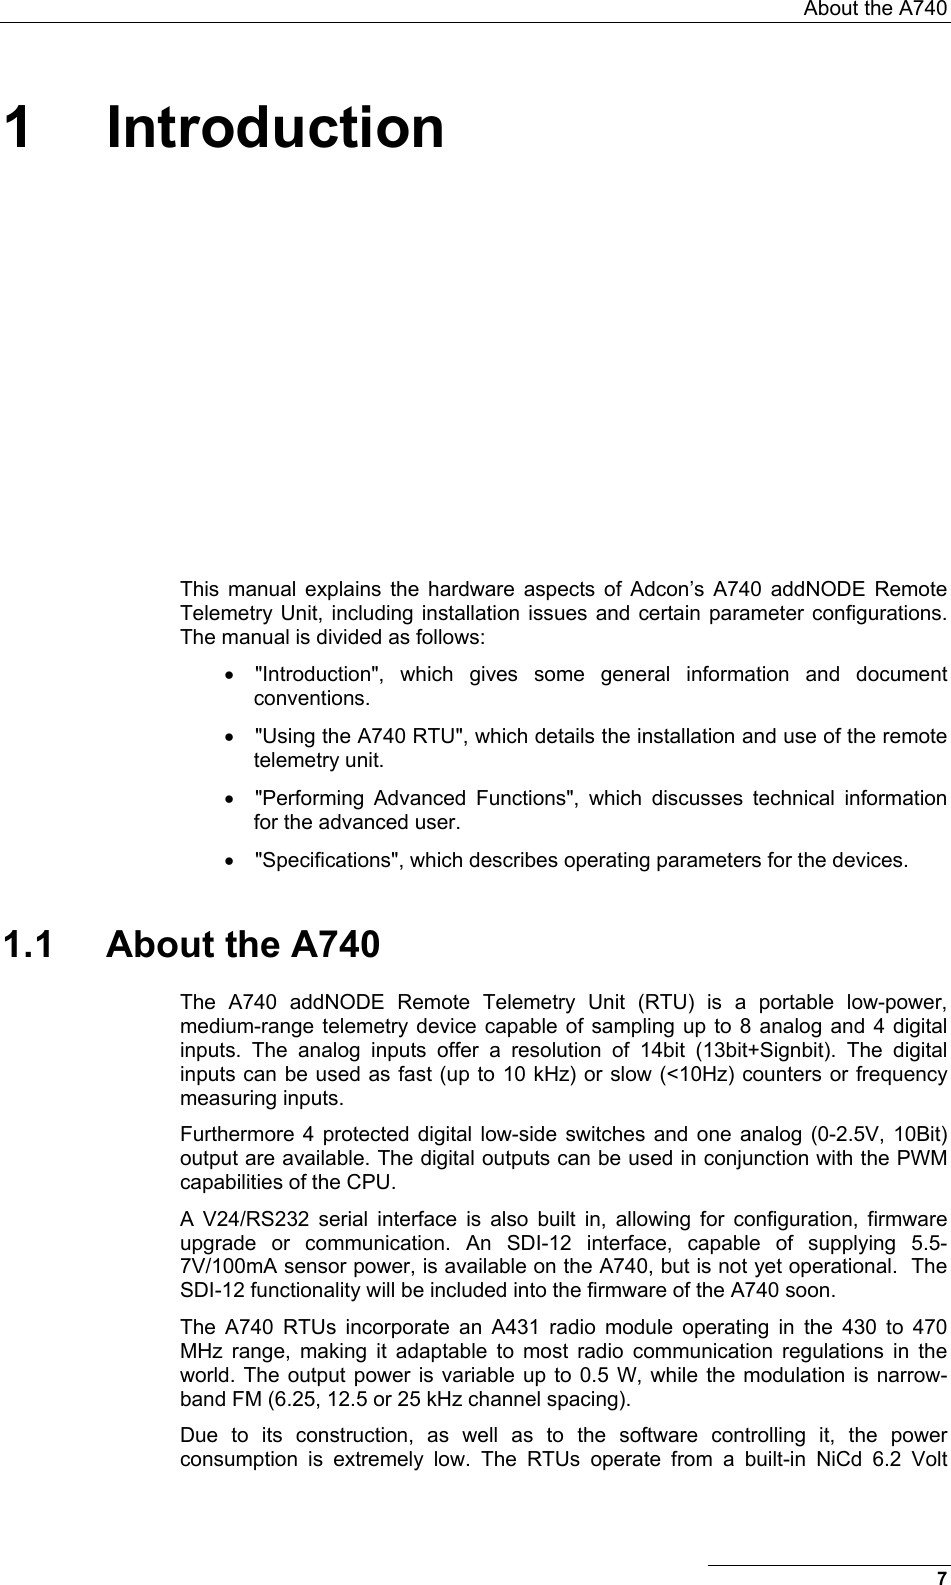  About the A740 1 Introduction This manual explains the hardware aspects of Adcon’s A740 addNODE Remote Telemetry Unit, including installation issues and certain parameter configurations. The manual is divided as follows: •  &quot;Introduction&quot;, which gives some general information and document conventions. •  &quot;Using the A740 RTU&quot;, which details the installation and use of the remote telemetry unit. •  &quot;Performing Advanced Functions&quot;, which discusses technical information for the advanced user. •  &quot;Specifications&quot;, which describes operating parameters for the devices. 1.1 About the A740 The A740 addNODE Remote Telemetry Unit (RTU) is a portable low-power, medium-range telemetry device capable of sampling up to 8 analog and 4 digital inputs. The analog inputs offer a resolution of 14bit (13bit+Signbit). The digital inputs can be used as fast (up to 10 kHz) or slow (&lt;10Hz) counters or frequency measuring inputs.  Furthermore 4 protected digital low-side switches and one analog (0-2.5V, 10Bit) output are available. The digital outputs can be used in conjunction with the PWM capabilities of the CPU.  A V24/RS232 serial interface is also built in, allowing for configuration, firmware upgrade or communication. An SDI-12 interface, capable of supplying 5.5-7V/100mA sensor power, is available on the A740, but is not yet operational.  The SDI-12 functionality will be included into the firmware of the A740 soon.  The A740 RTUs incorporate an A431 radio module operating in the 430 to 470 MHz range, making it adaptable to most radio communication regulations in the world. The output power is variable up to 0.5 W, while the modulation is narrow-band FM (6.25, 12.5 or 25 kHz channel spacing).  Due to its construction, as well as to the software controlling it, the power consumption is extremely low. The RTUs operate from a built-in NiCd 6.2 Volt 7 